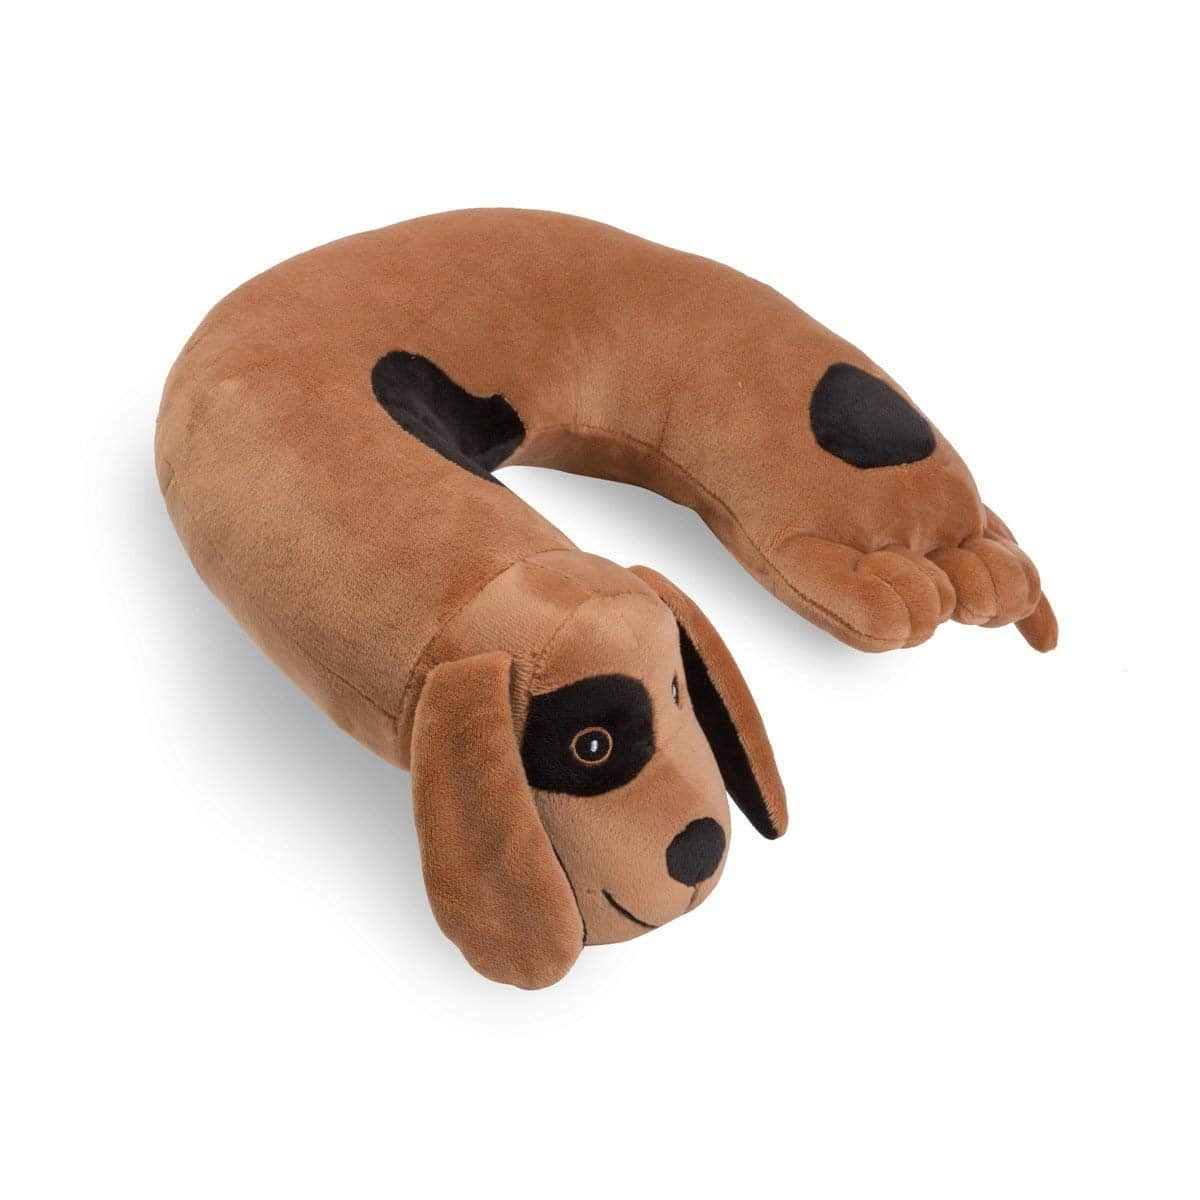 Critter Piller Kid's Travel Buddy and Comfort Pillow, Brown Dog, Hypoallergenic, Machine Washable, Recycled Filling